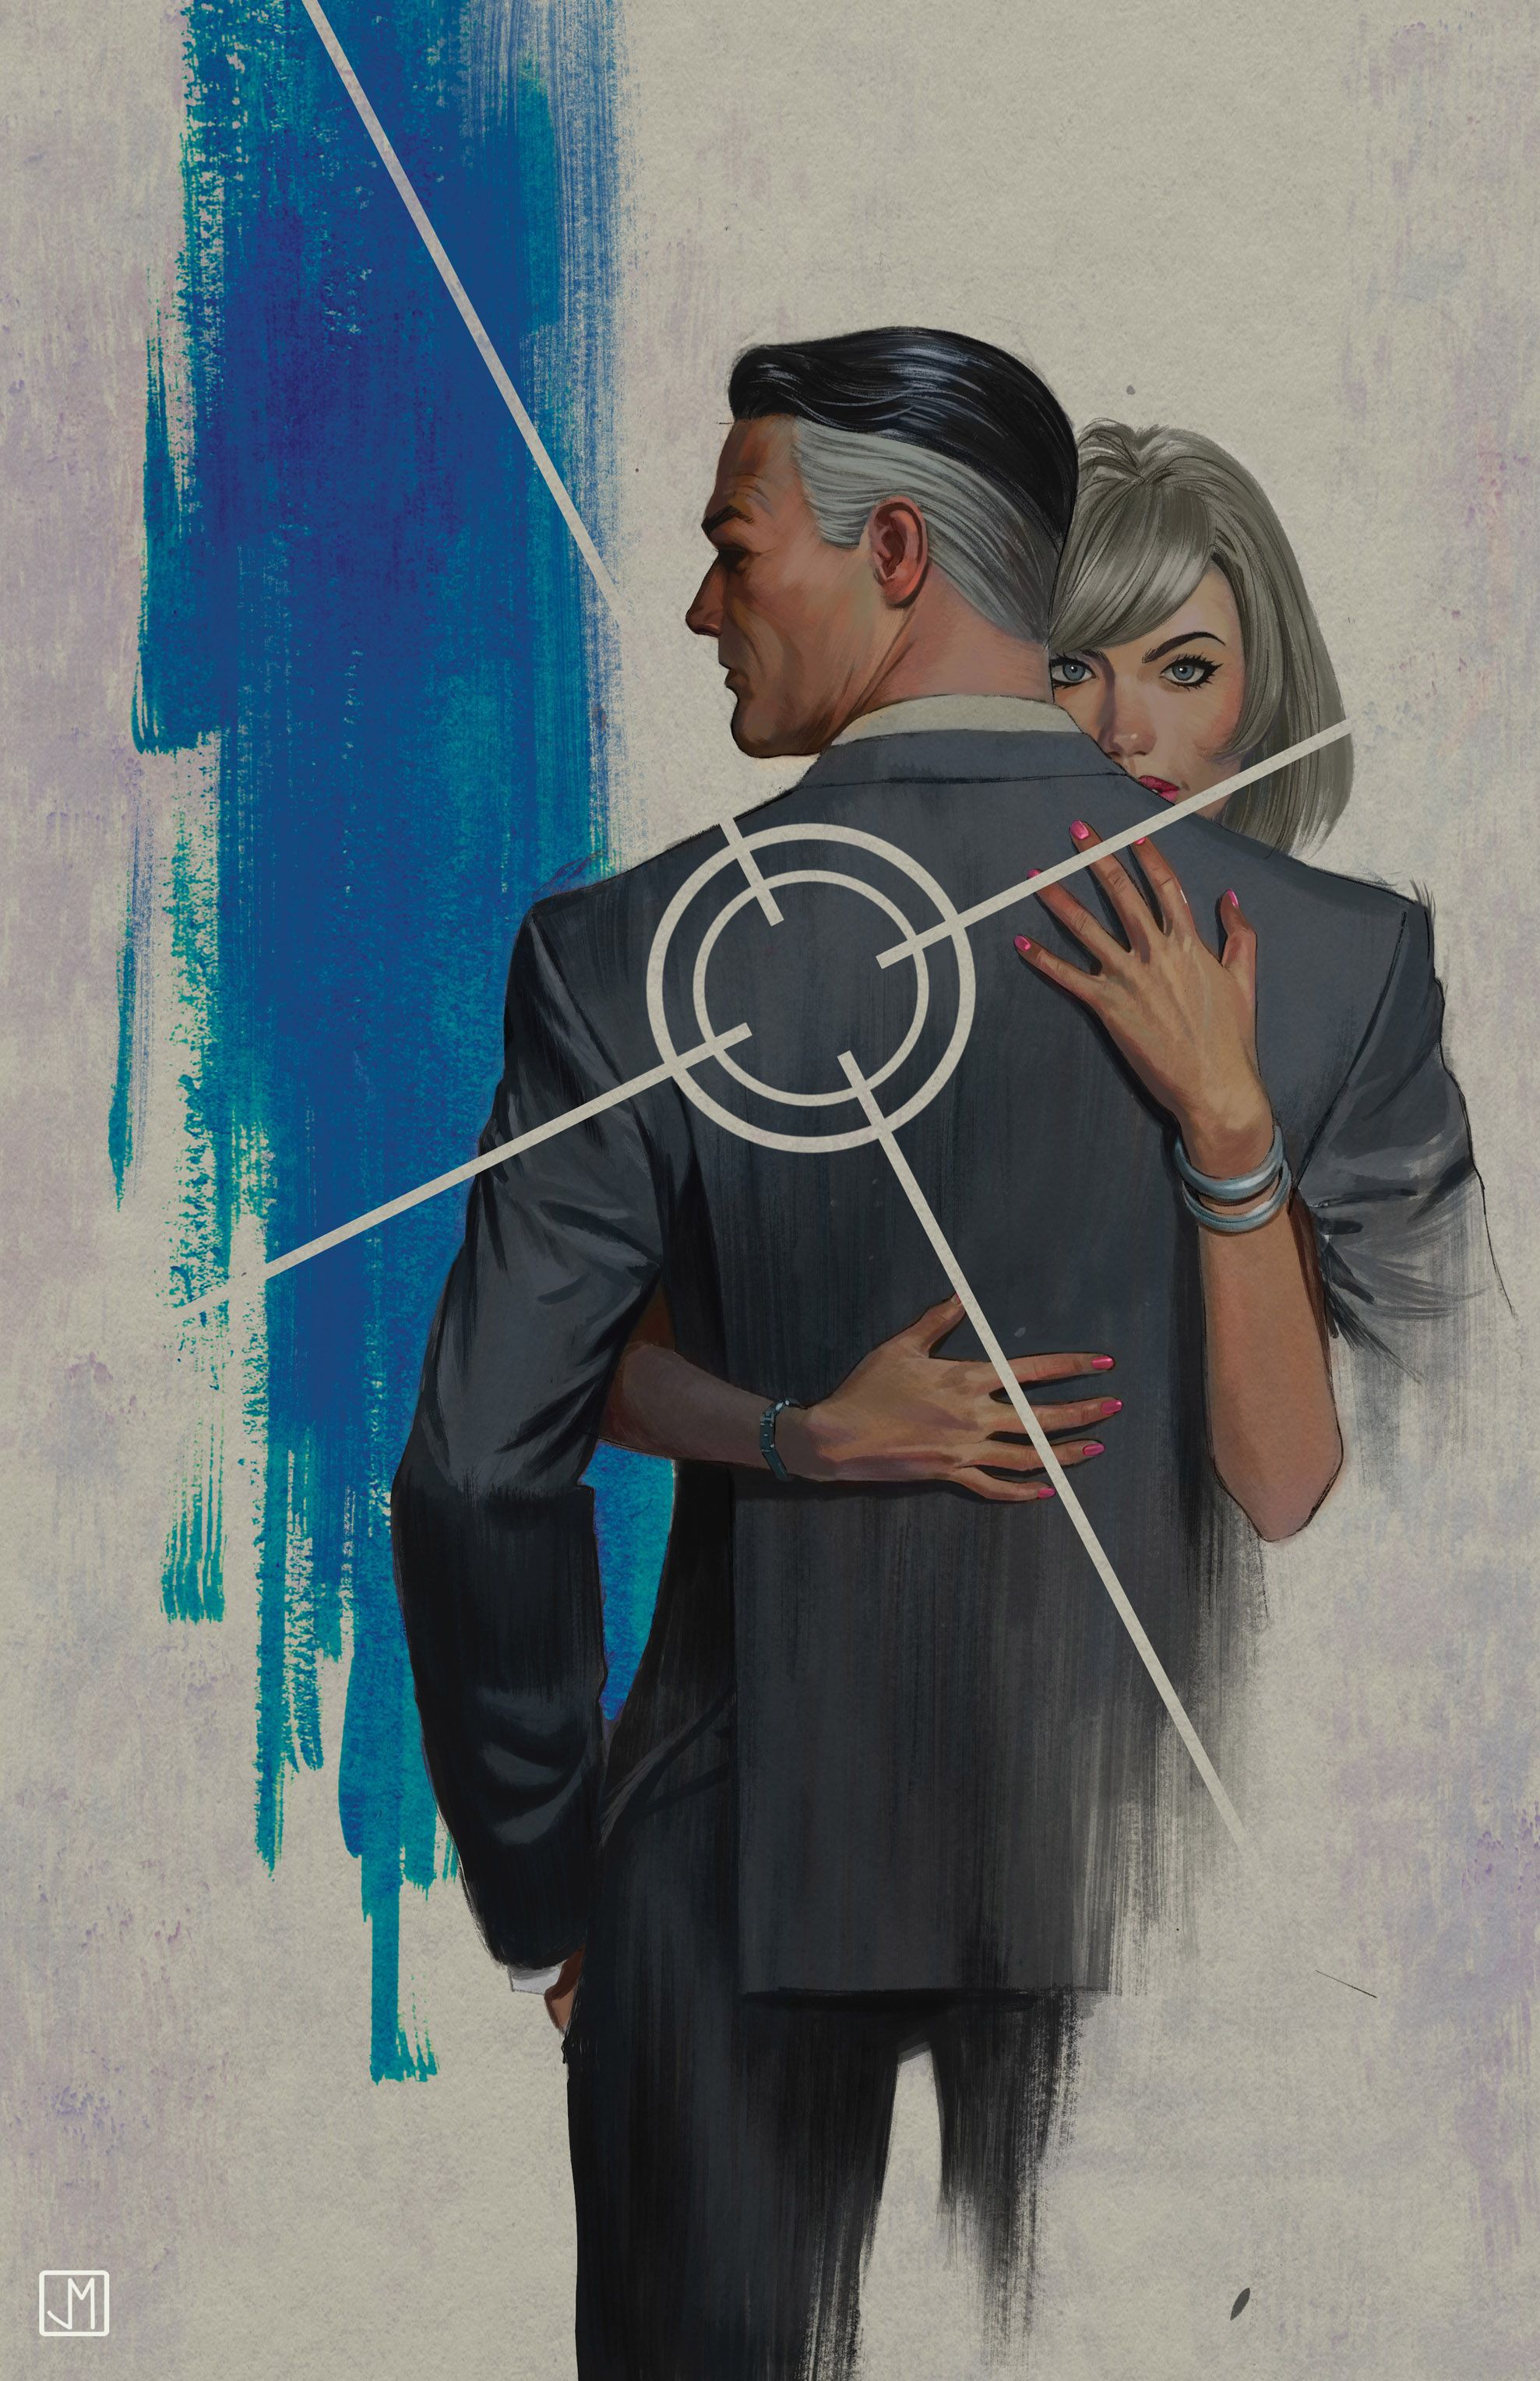 The Human Target 12 1-25 Variant